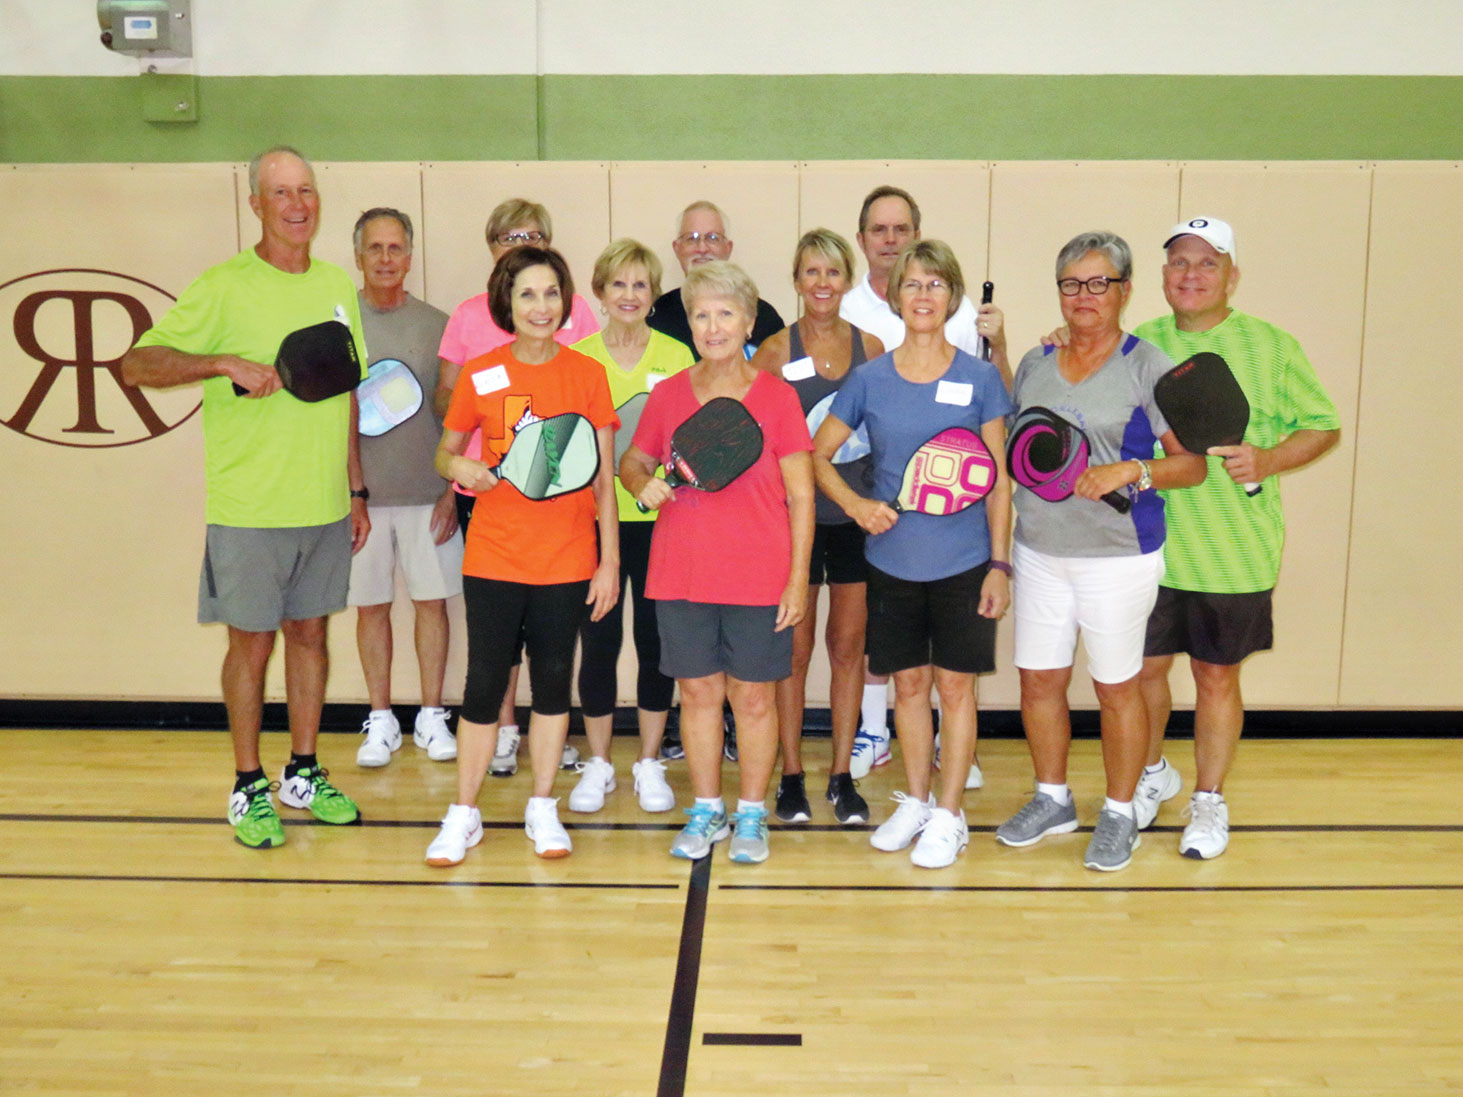 Members of the The October Pickleball Academy